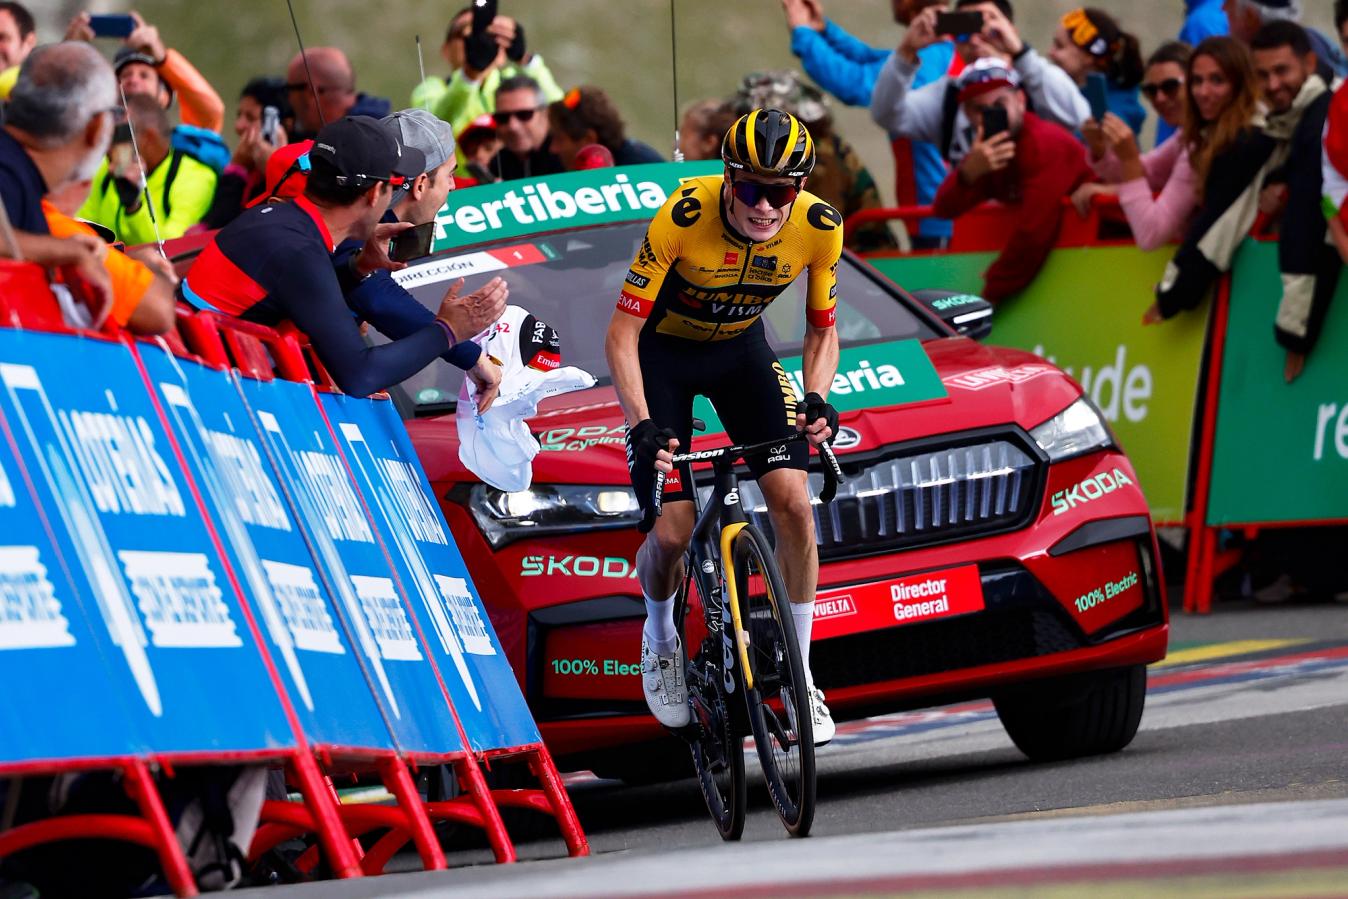 Jonas Vingegaard took his first Vuelta a España stage victory in style